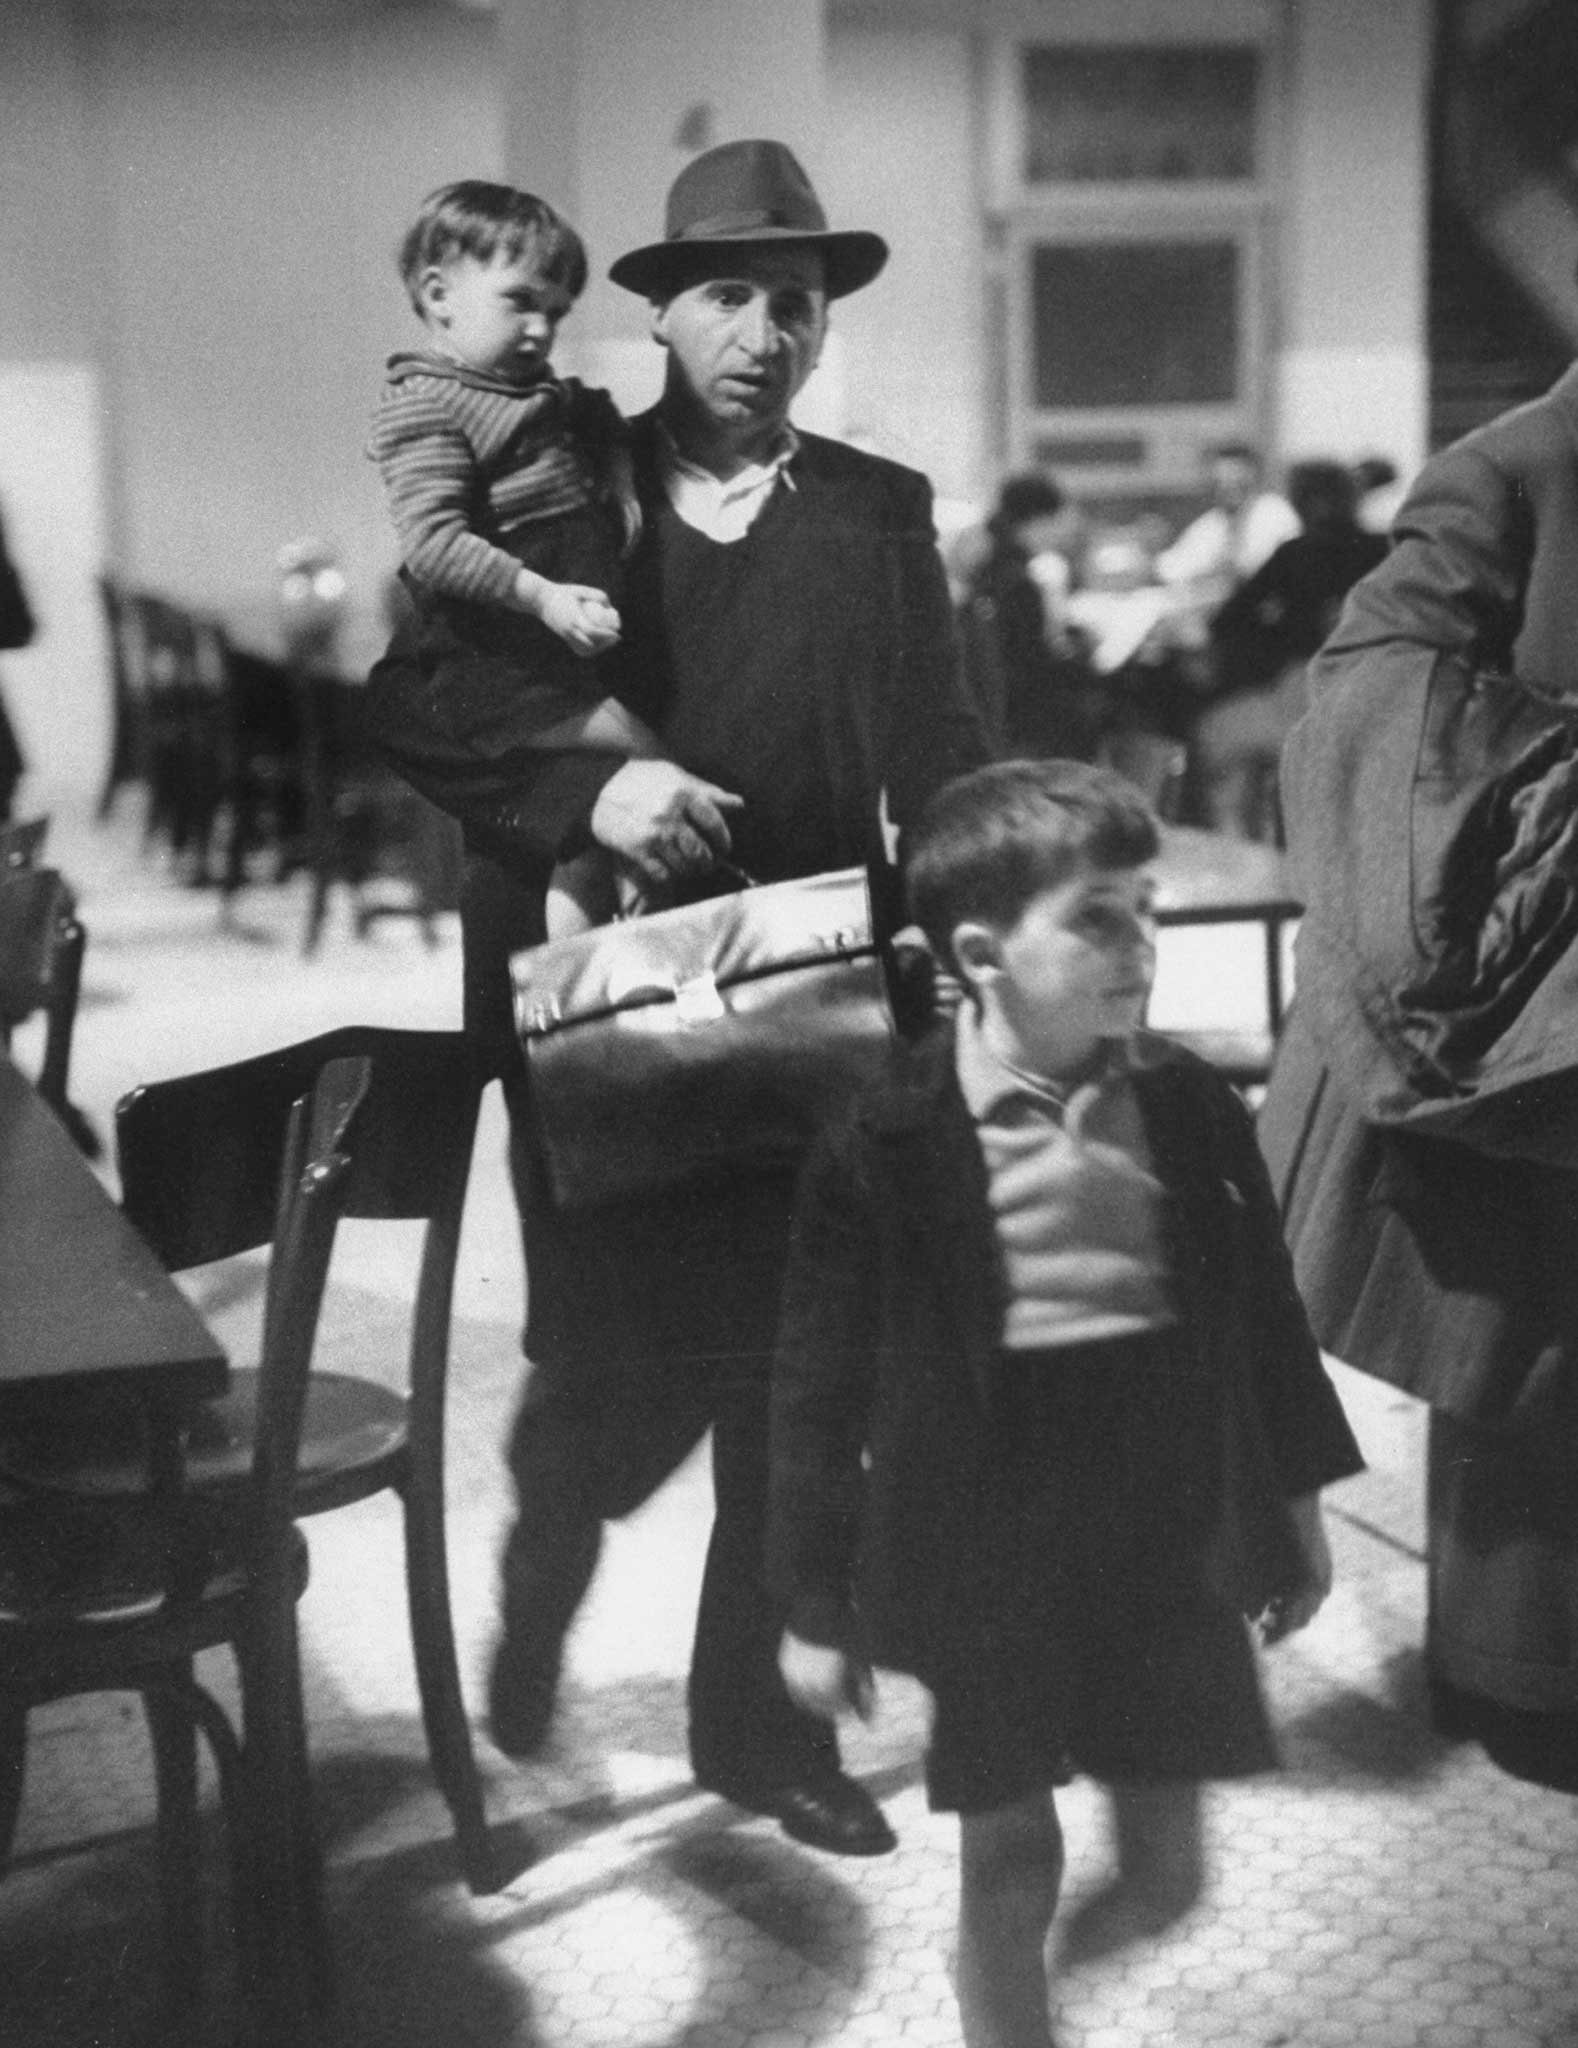 "Antonio Magnani copes with his children and fat briefcase holding his entry papers." Ellis Island, 1950.